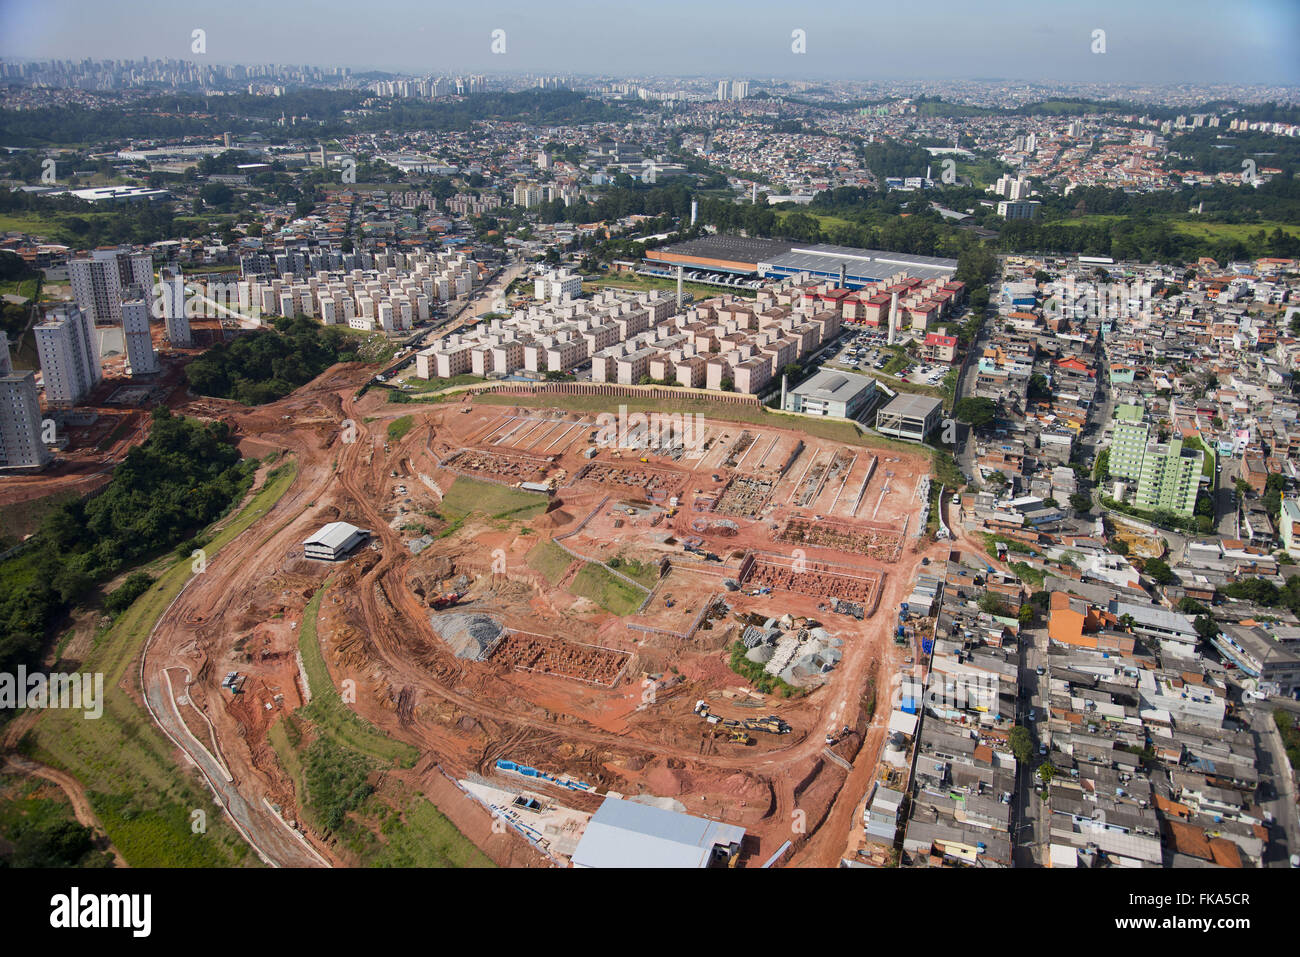 Foundations for construction of new housing units in the vicinity of Osasco Stock Photo